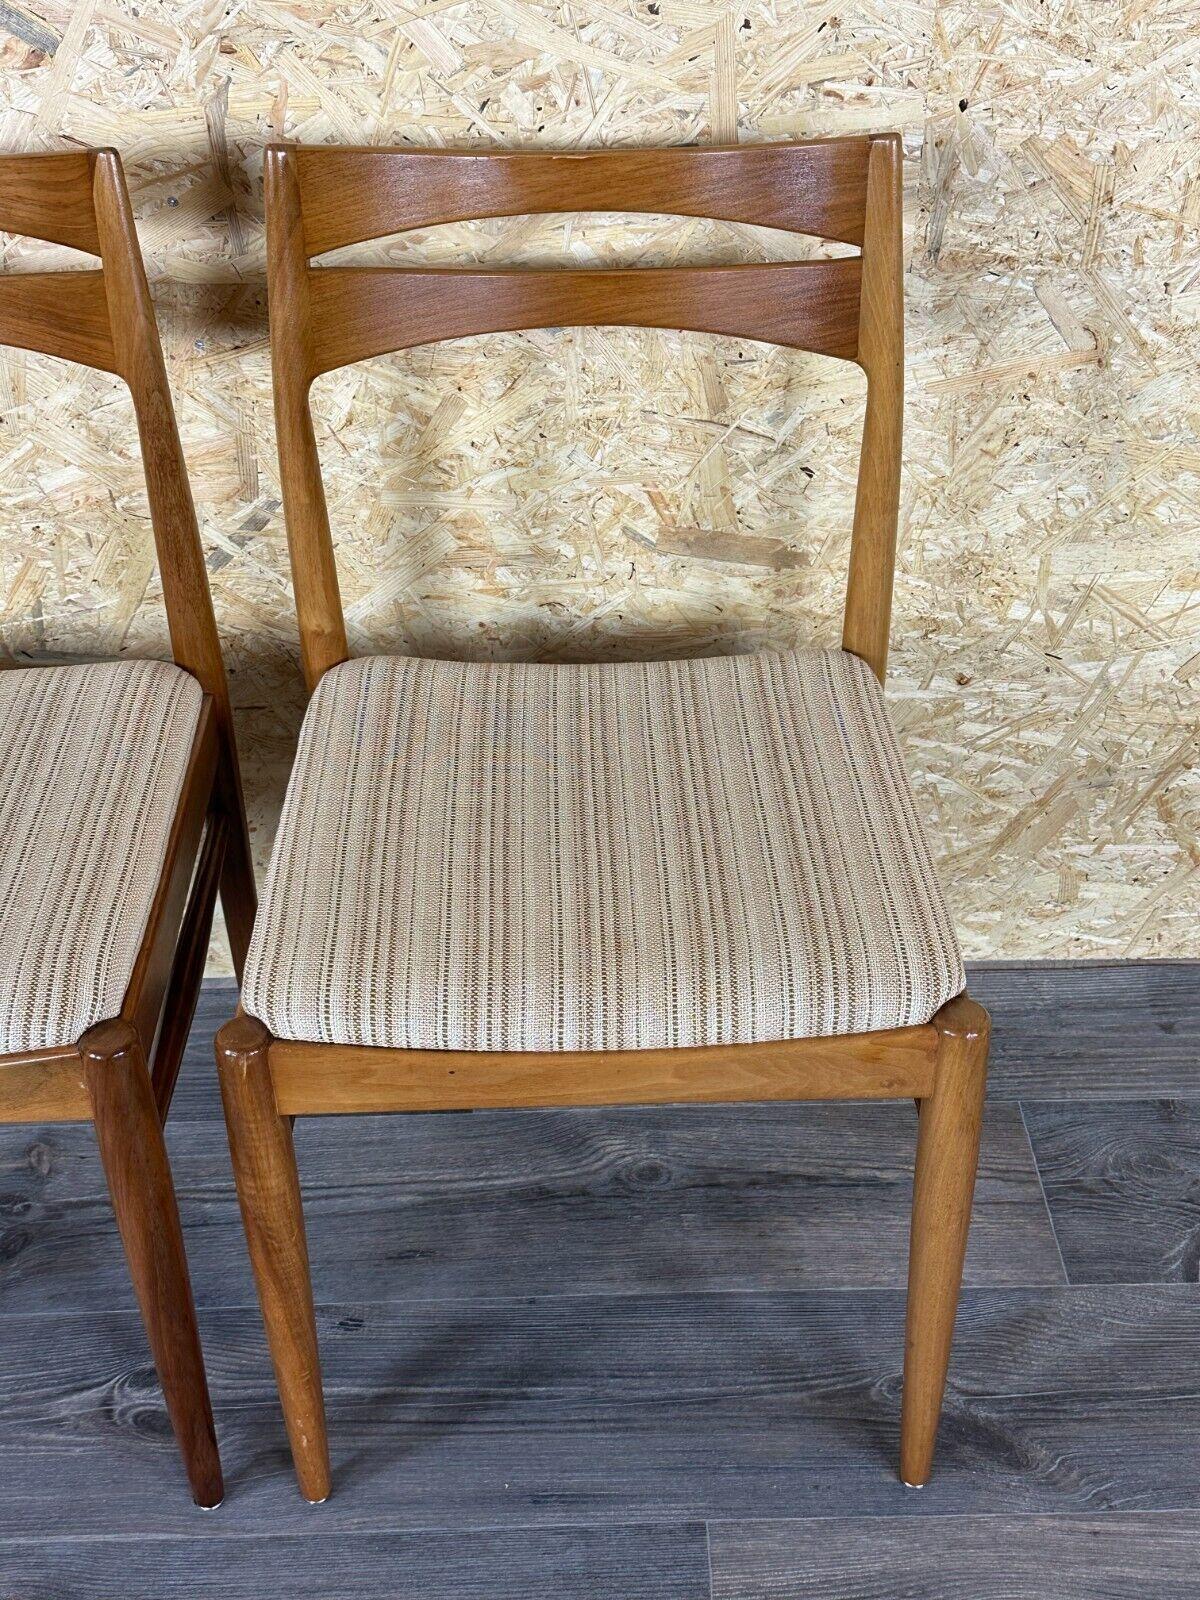 2x 60s 70s dining chair dining chair mid century Danish modern design For Sale 1